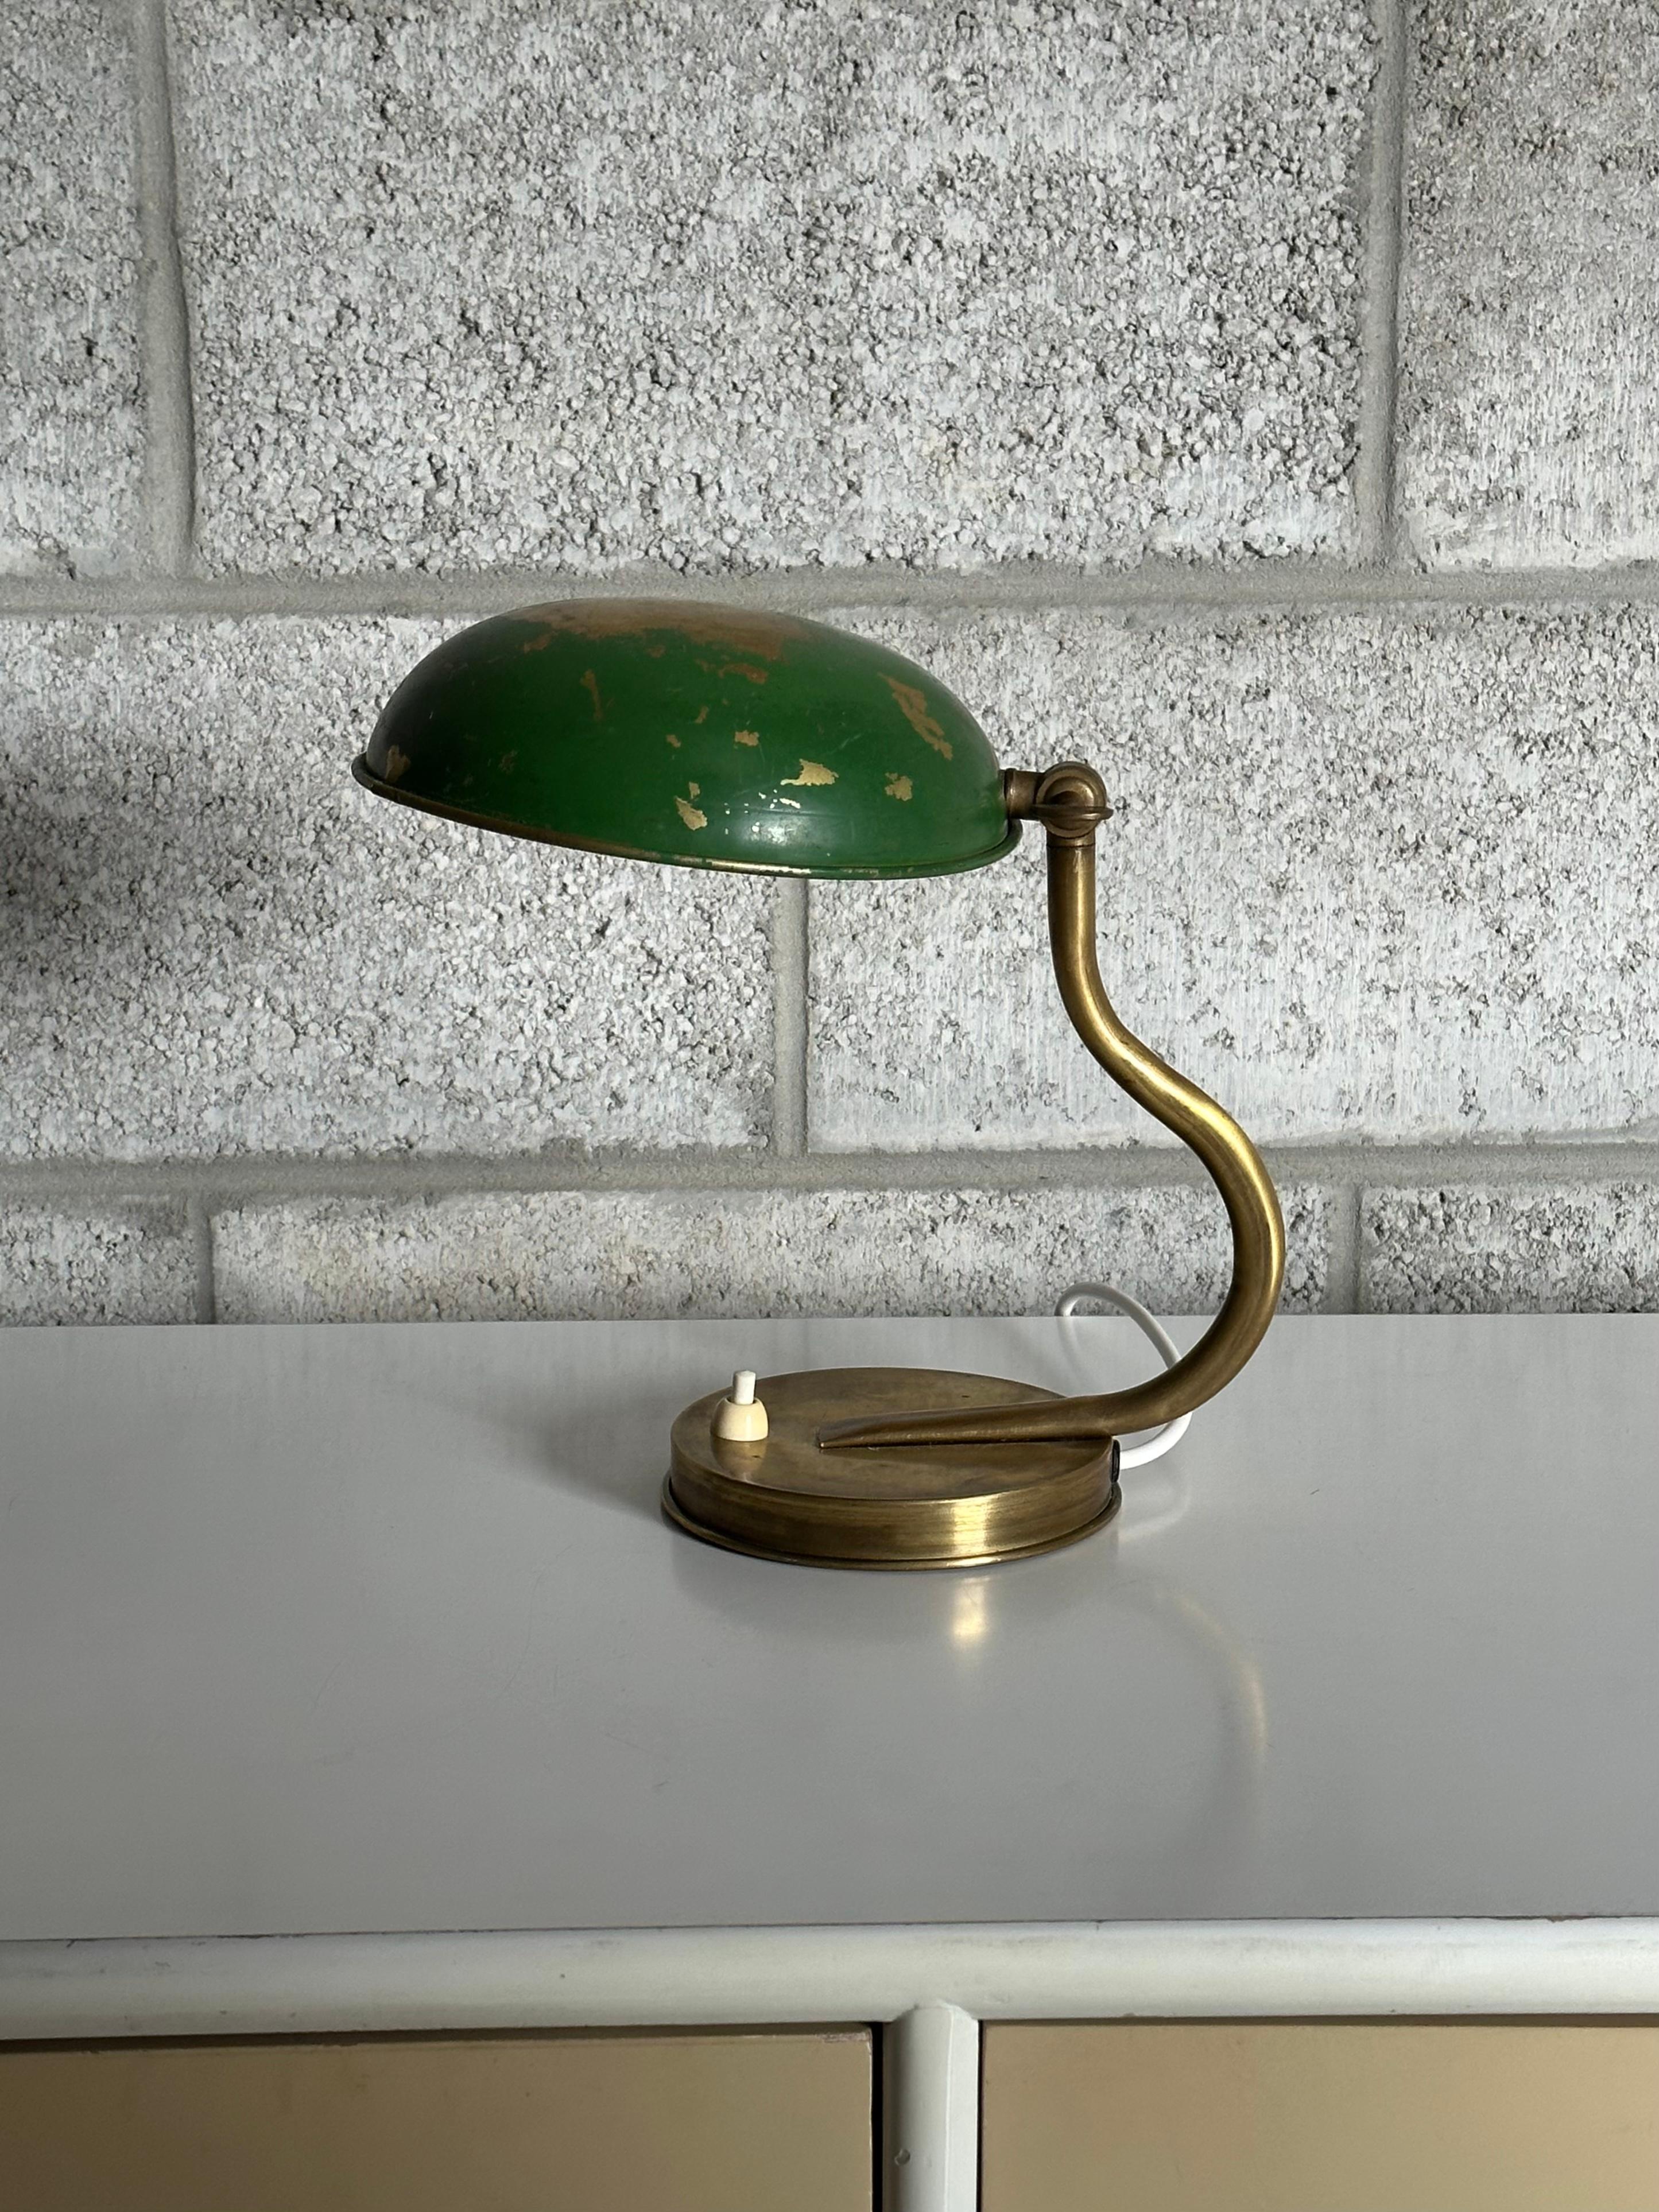 A unique small table or wall lamp by ASEA and attributed to Hans Bergström. This lamps features a bottom with a cutout in the base plate that allows for it to be hung via a nail or screw on a wall. Wonderful organic form of the brass neck, and